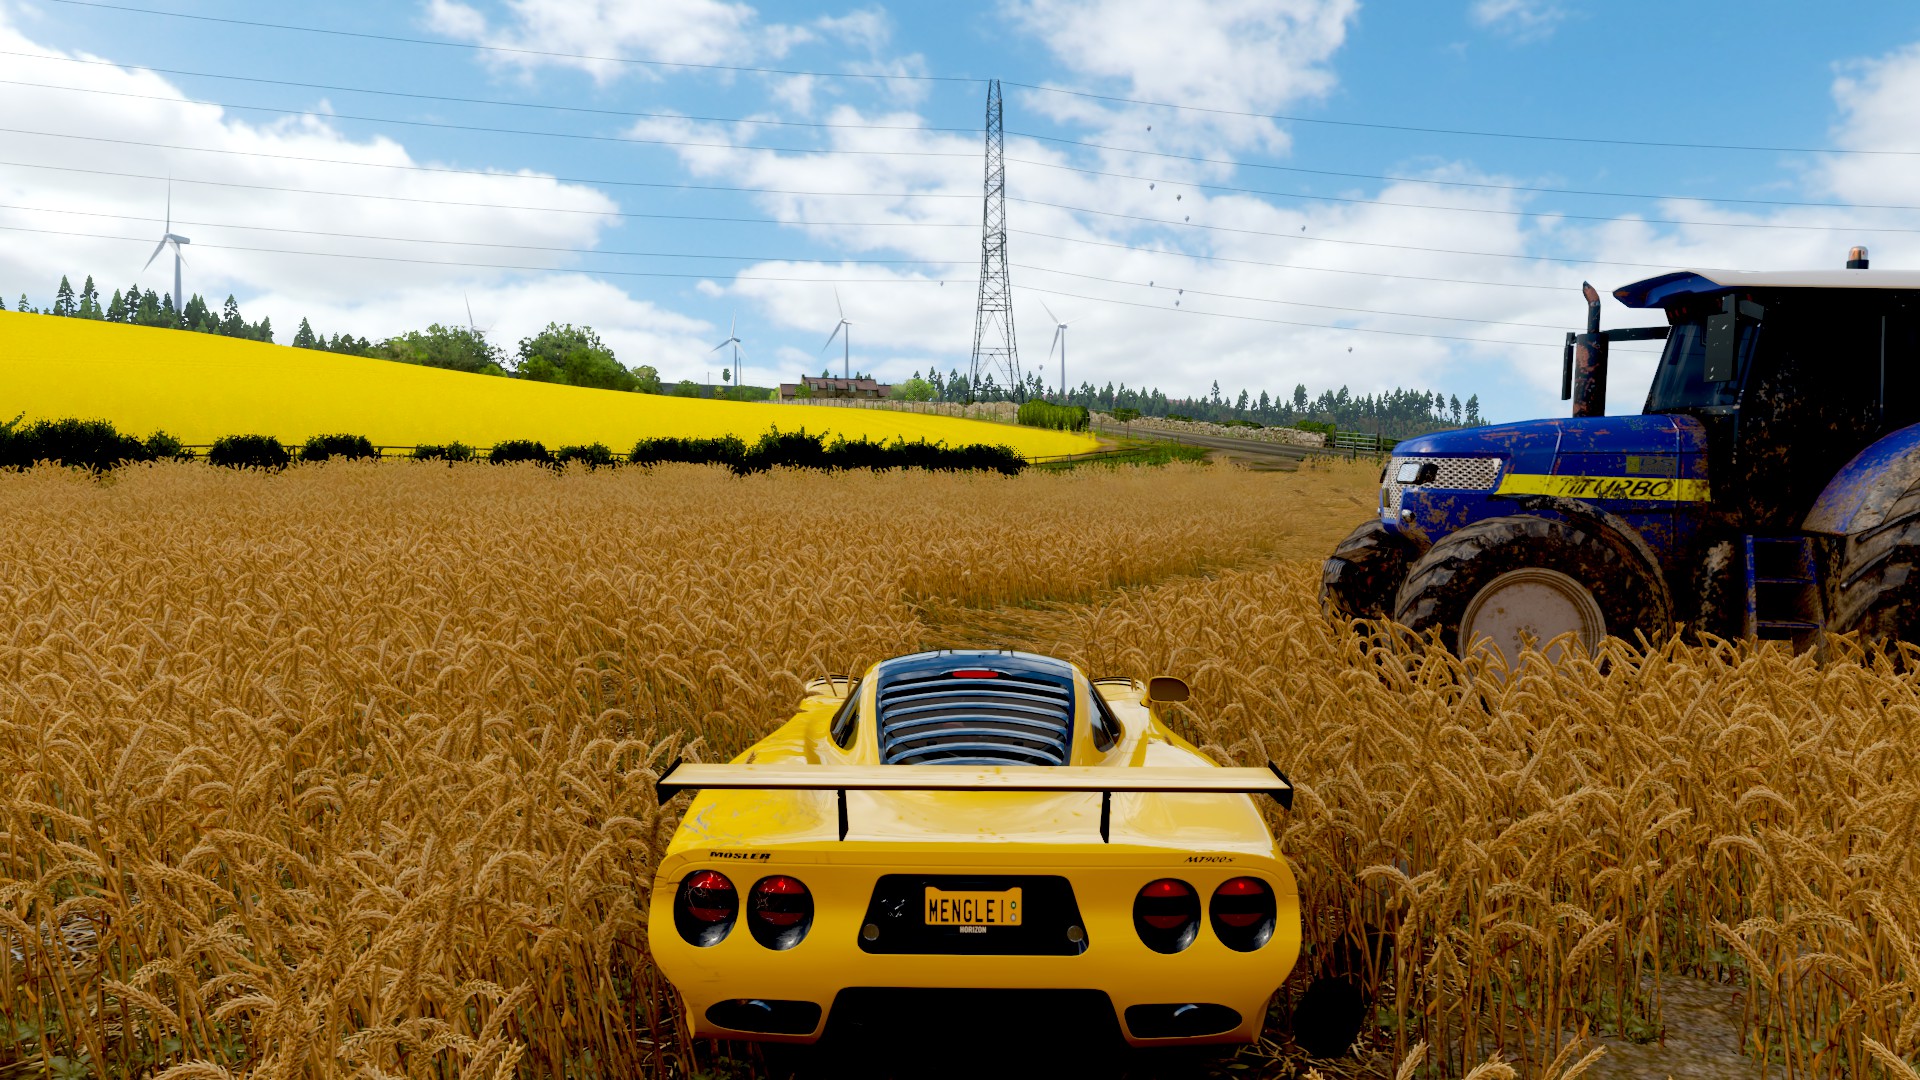 Forza Horizon 4 Landscape Video Games Clouds Sky Video Game Art Field Licence Plates Rear View Windm 1920x1080